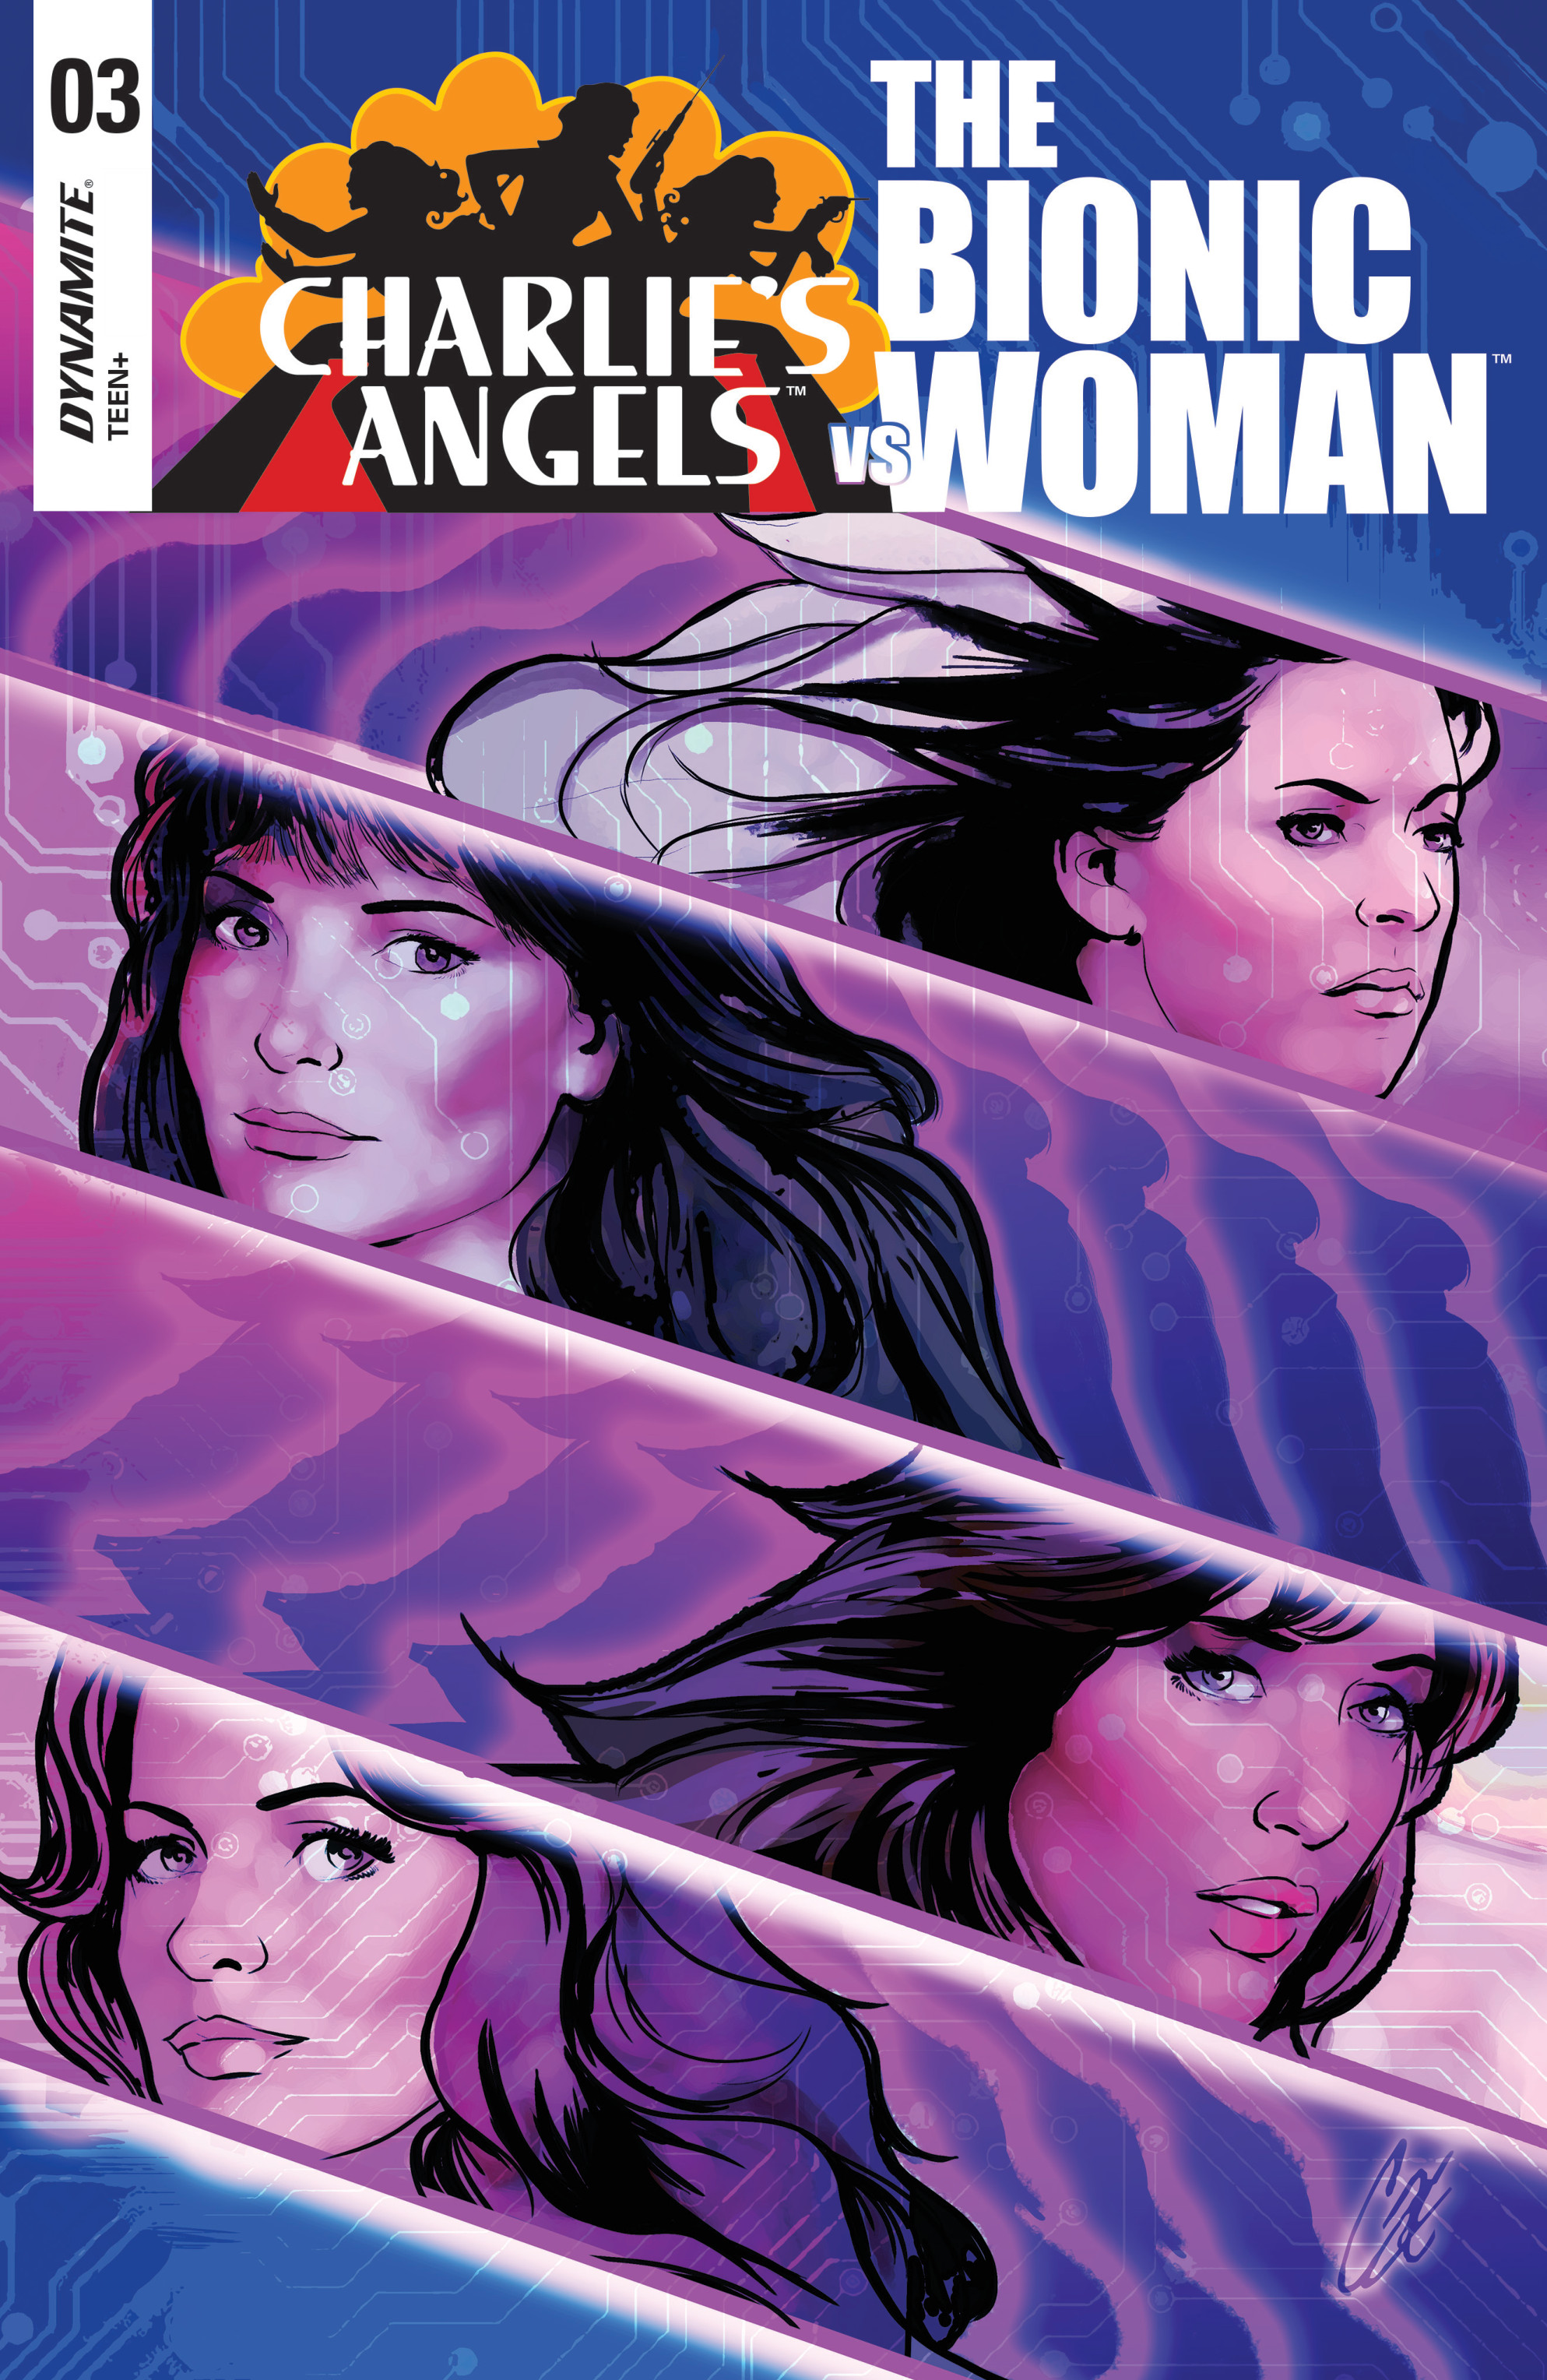 Read online Charlie's Angels vs. The Bionic Woman comic -  Issue #3 - 1